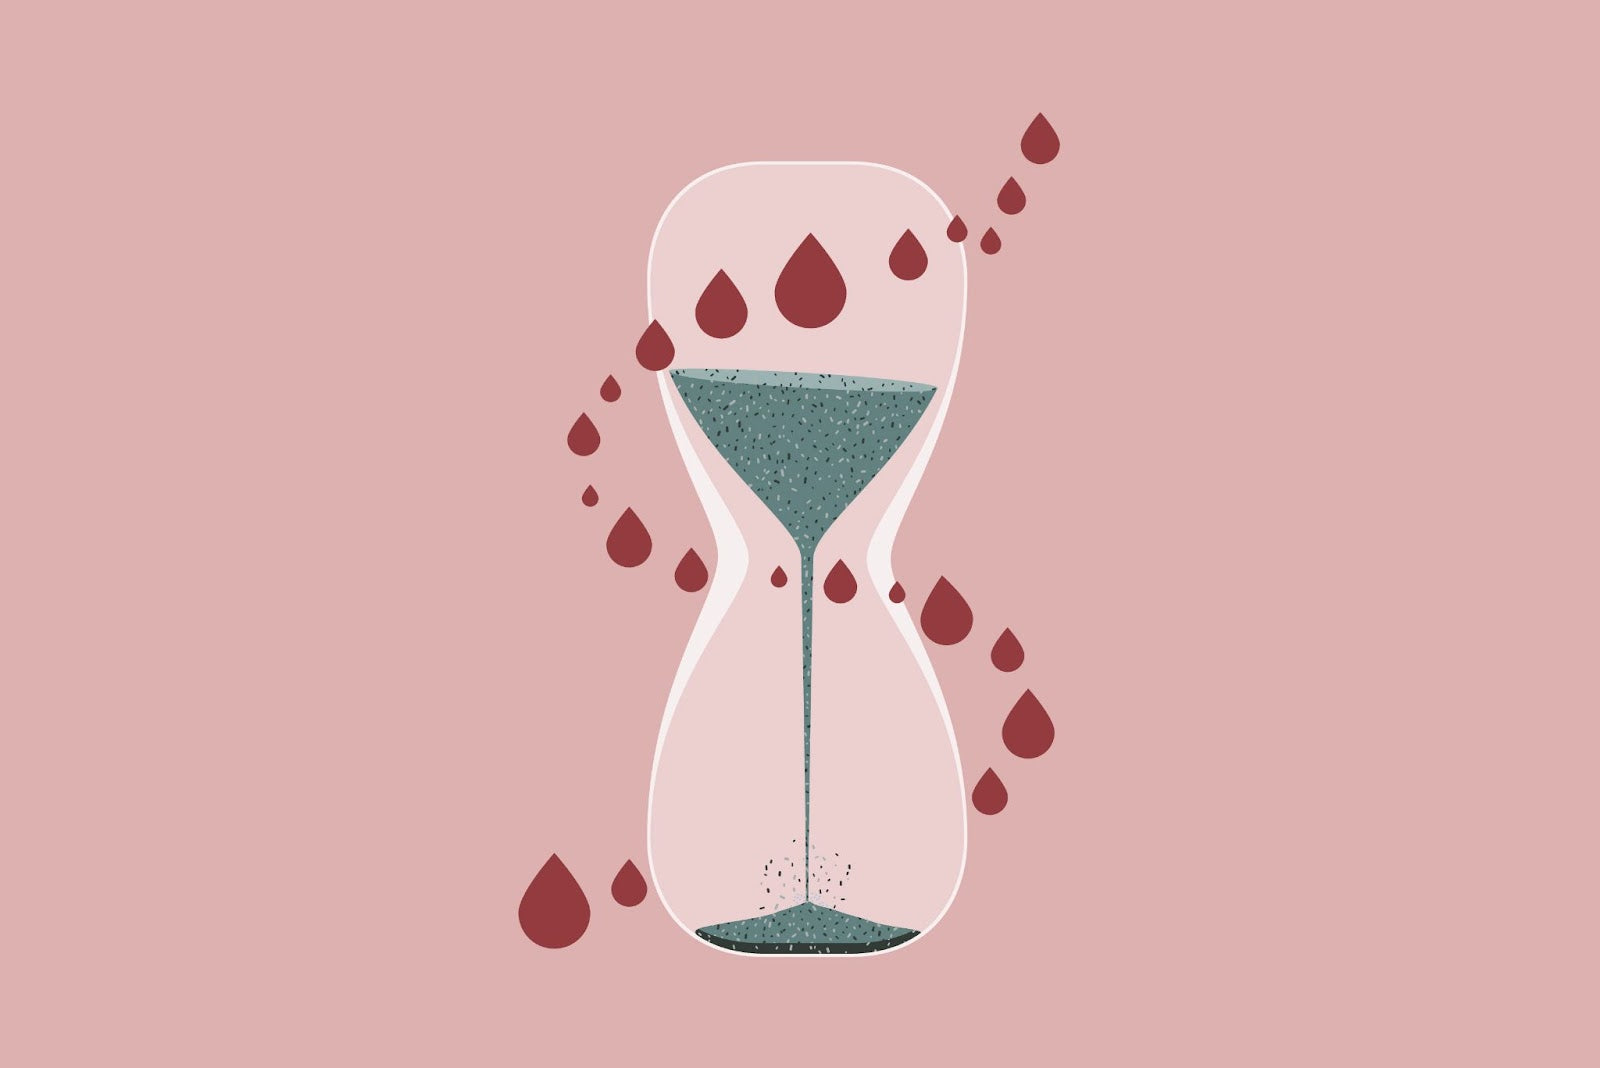 Drawing of a full hourglass surrounded by a helix of red droplets.